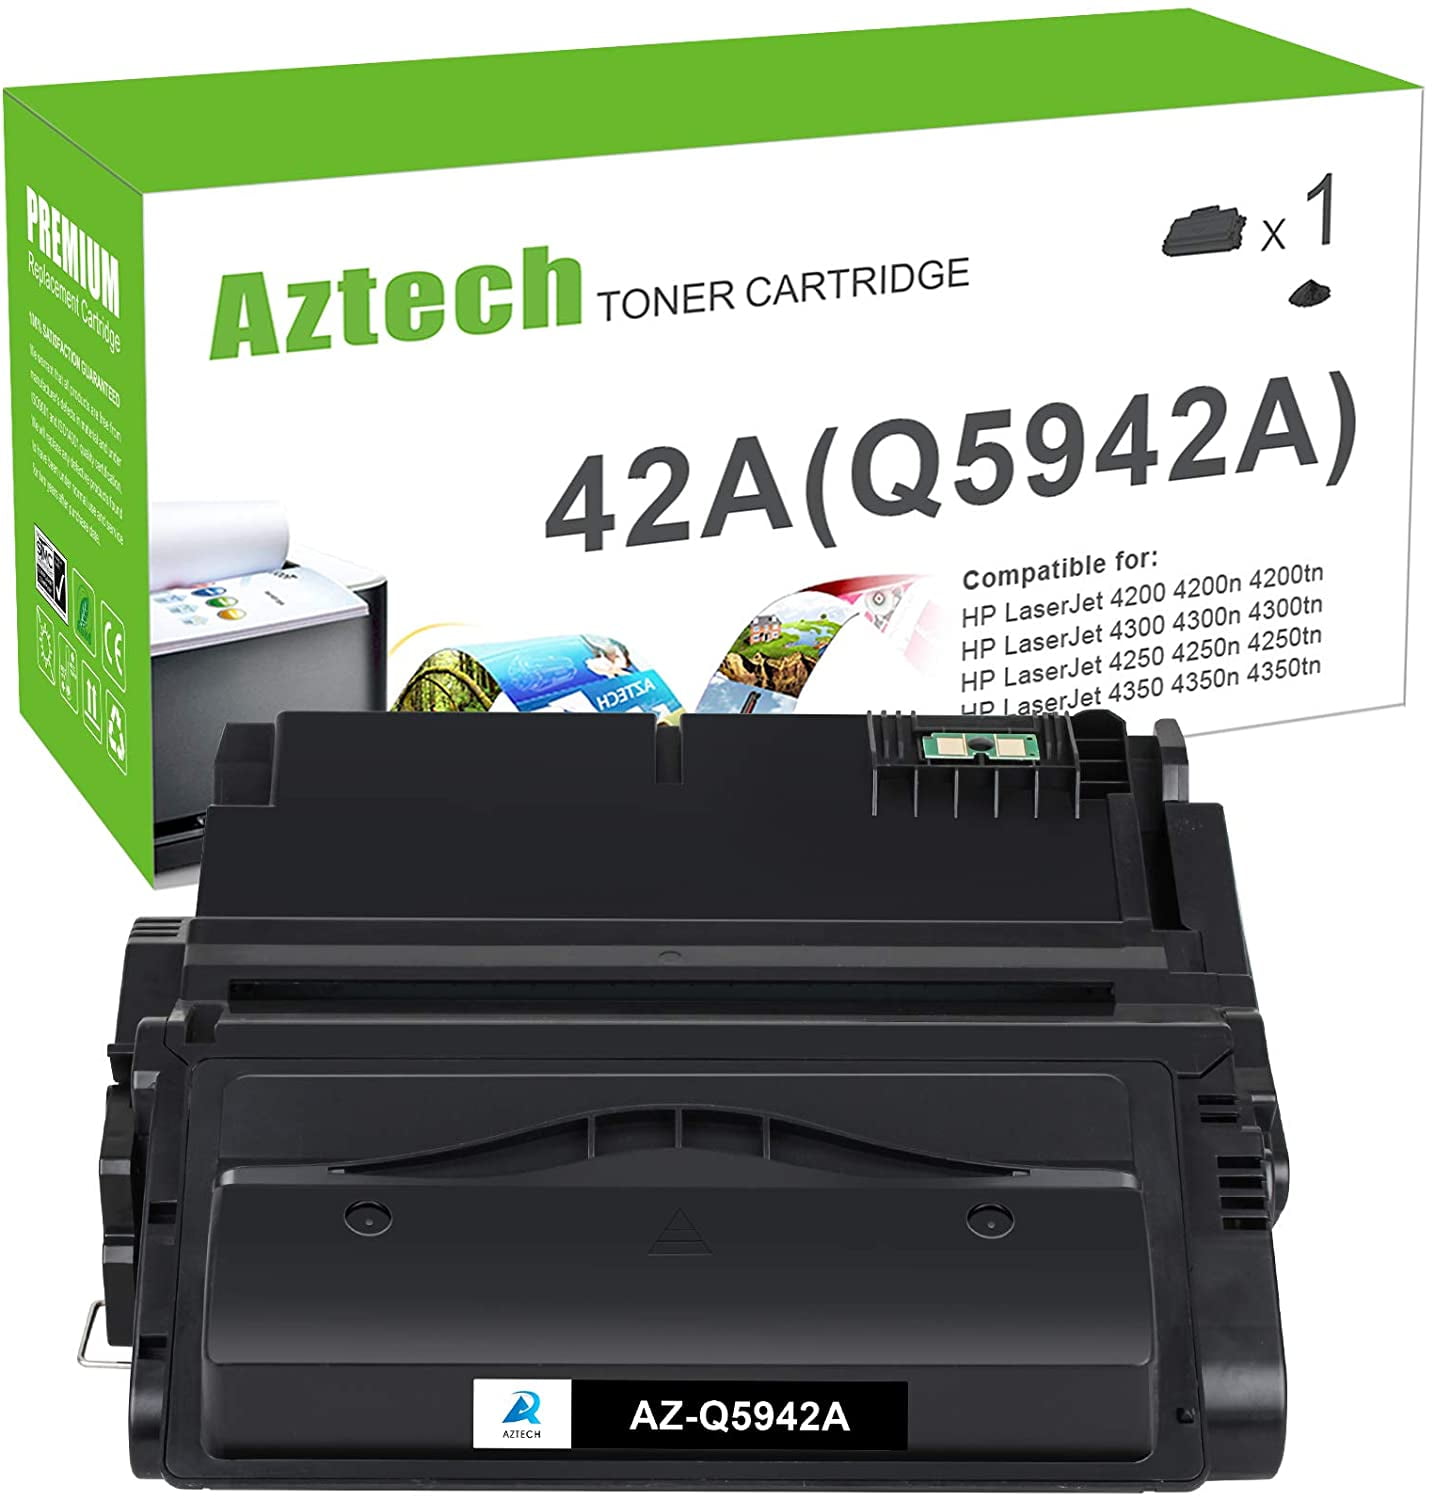 LD Compatible Replacement for 42A Q5942A Black Toner Cartridge for LaserJet  4240, 4240n, 4250, 4250dtn, 4250dtnsl, 4250n, 4250tn, 4350, 4350dtn